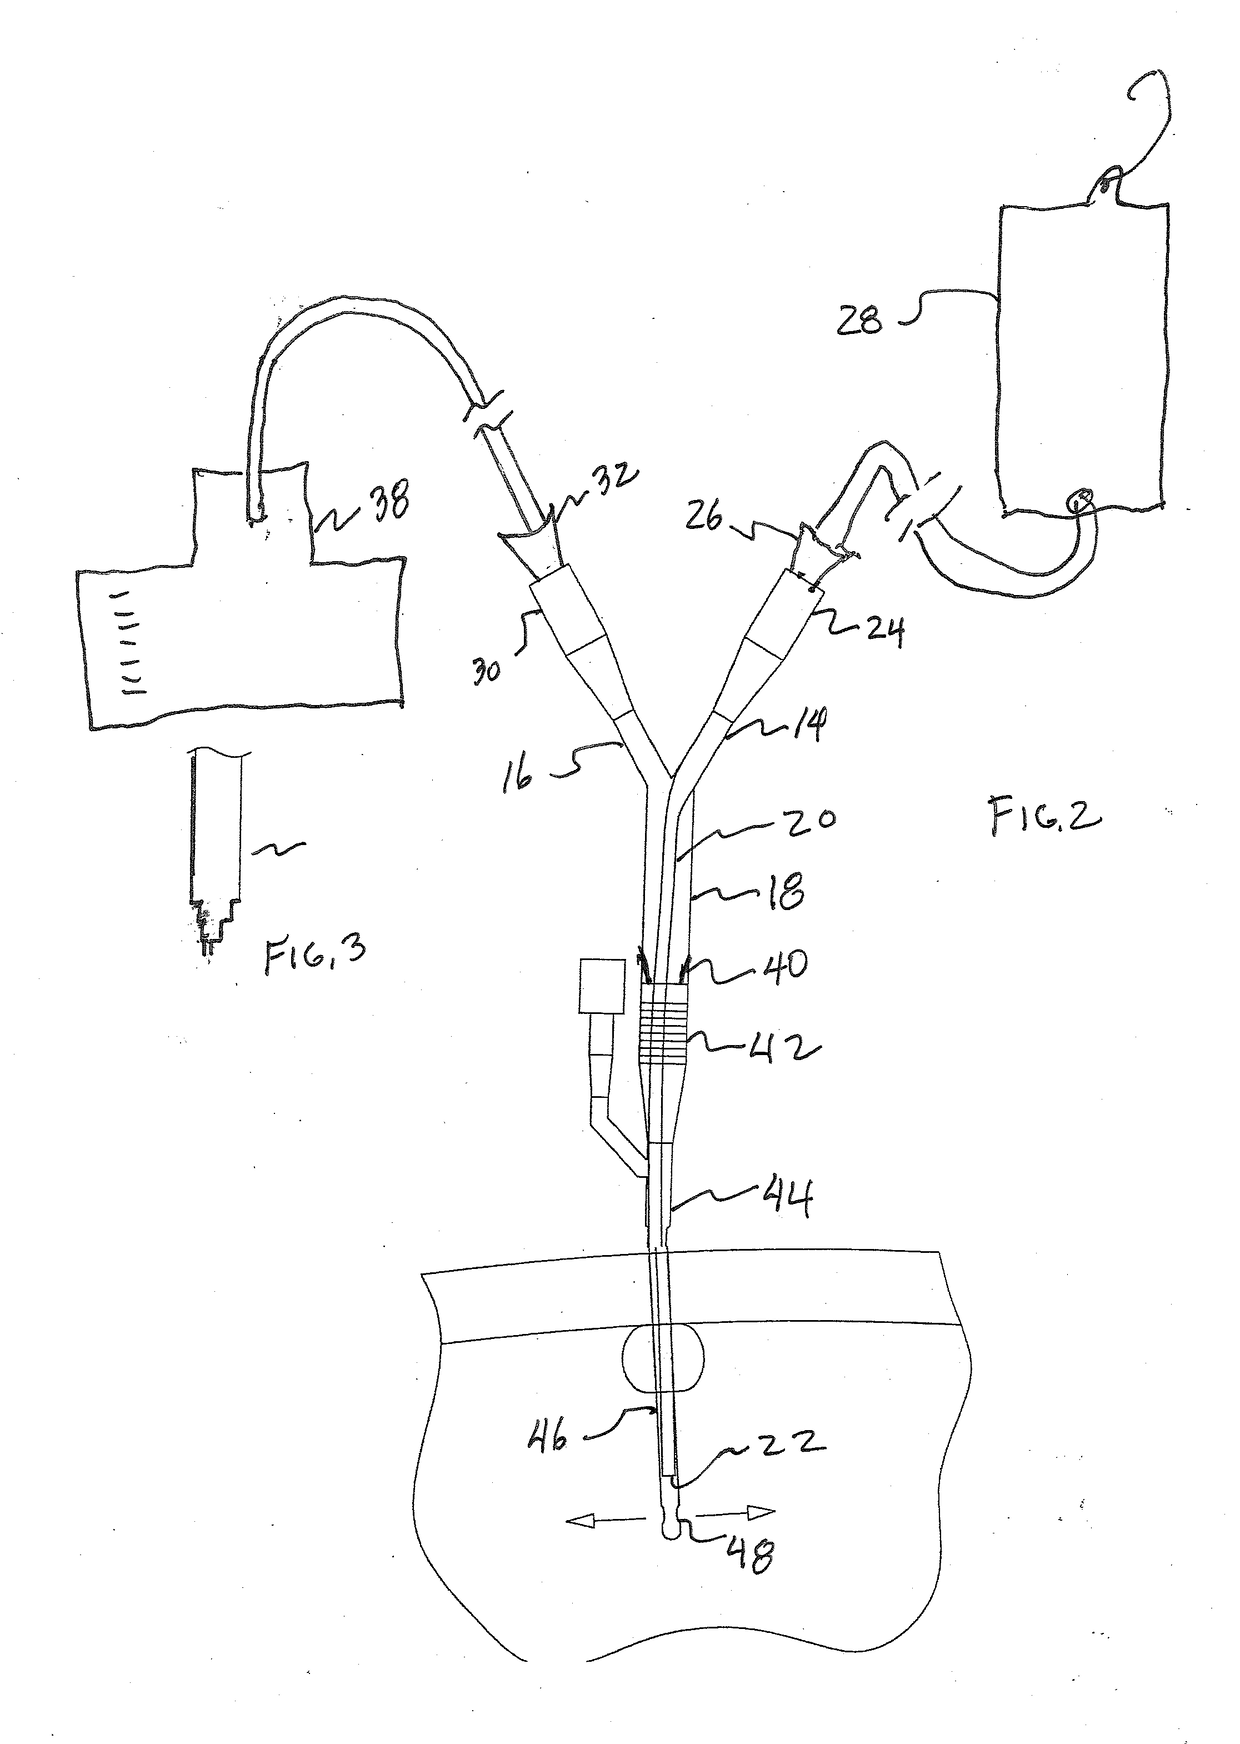 Continuous bladder irrigation adaptor for a foley catheter